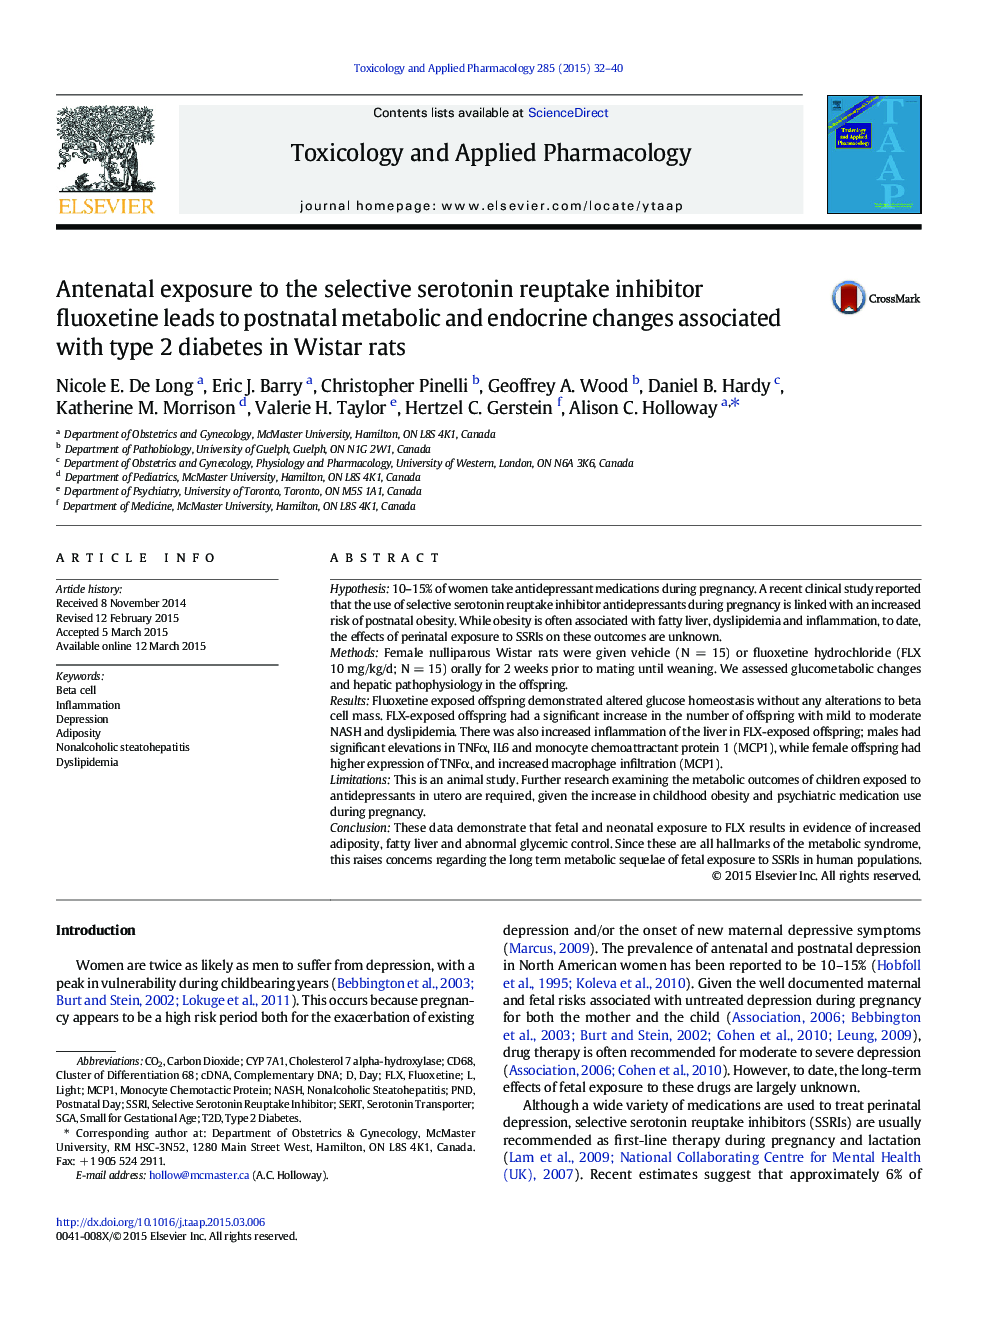 Antenatal exposure to the selective serotonin reuptake inhibitor fluoxetine leads to postnatal metabolic and endocrine changes associated with type 2 diabetes in Wistar rats